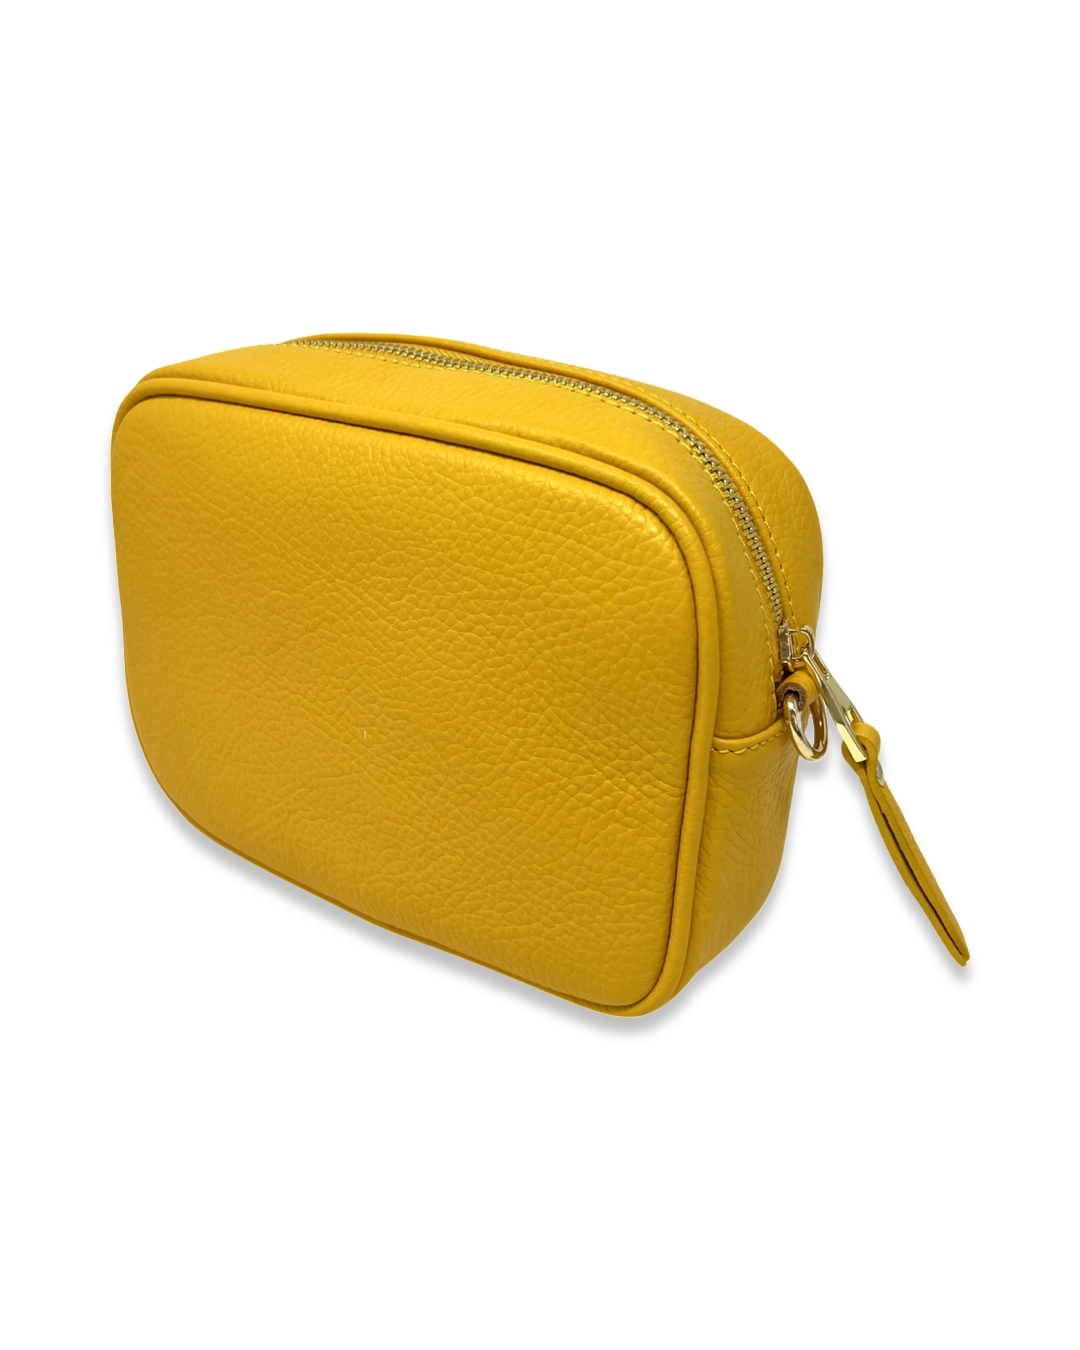 Firenze Bag in Sunny Yellow